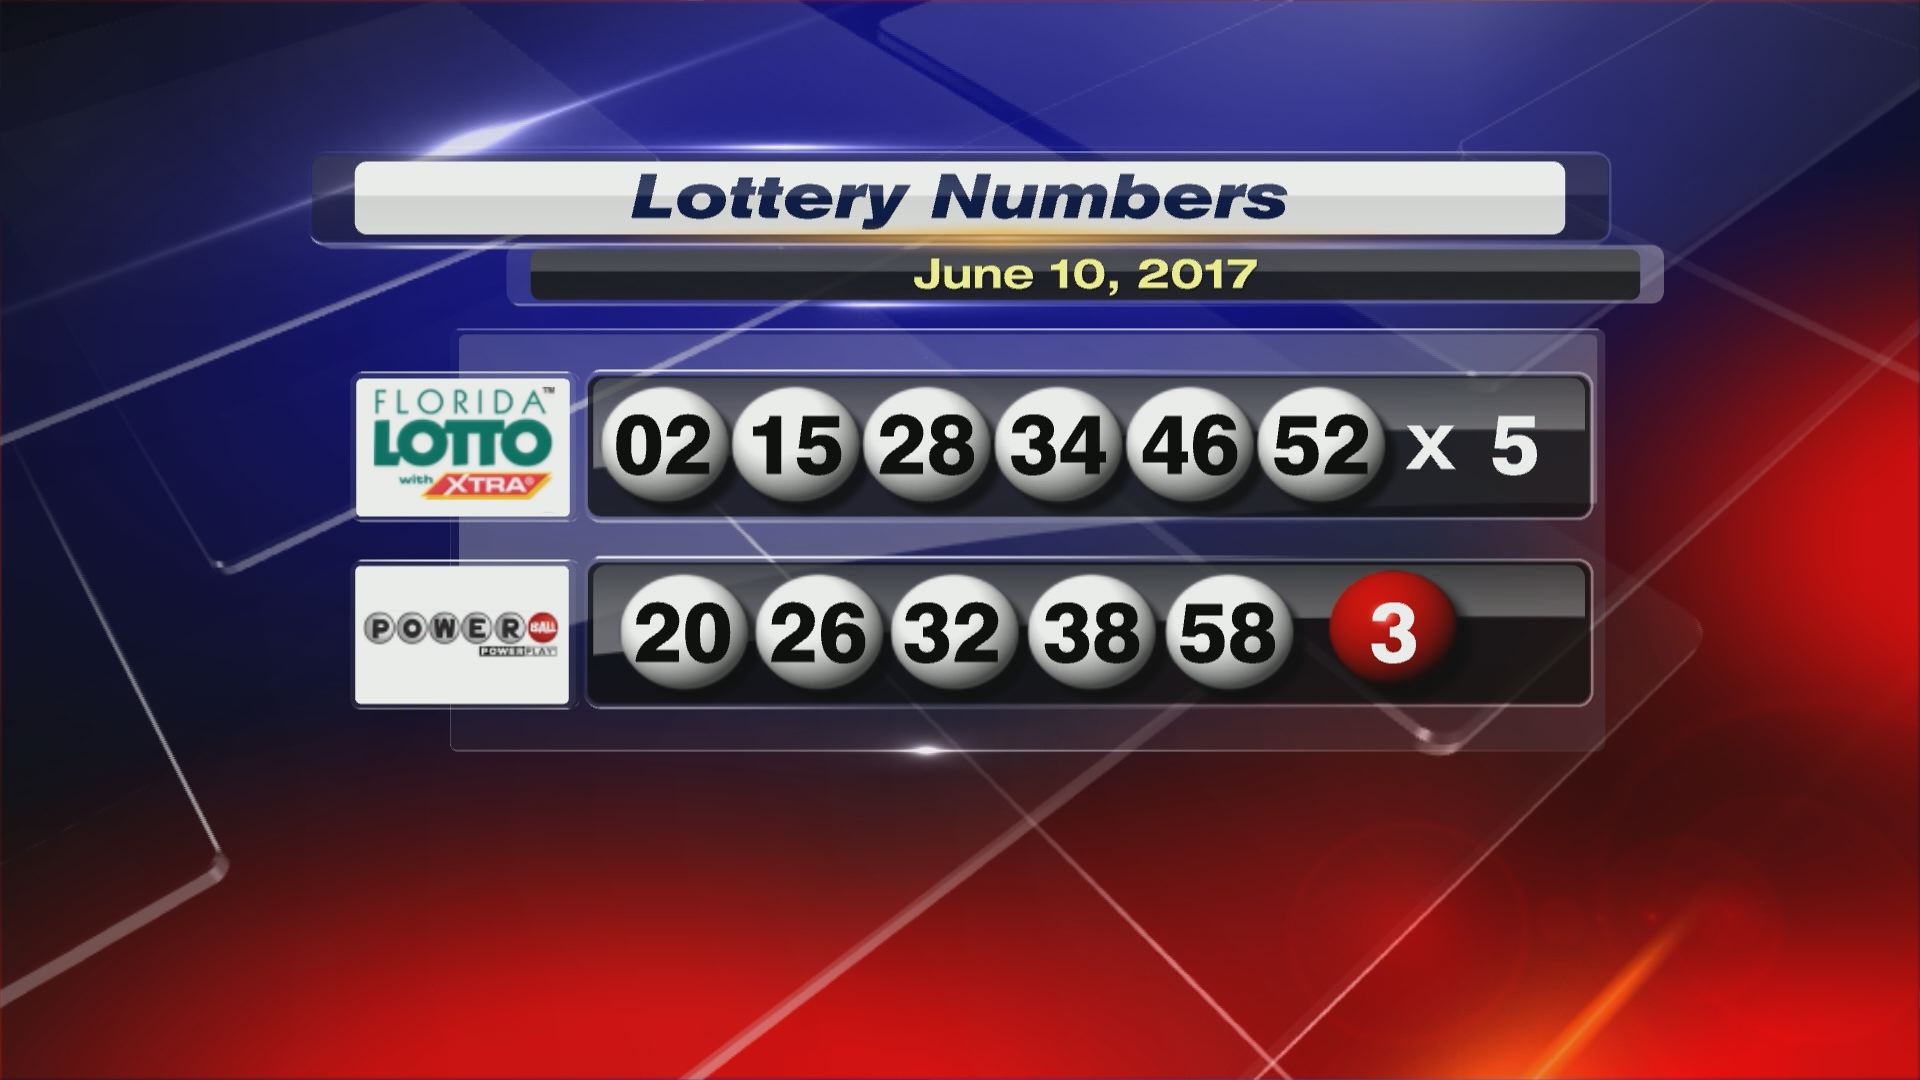 x lotto numbers